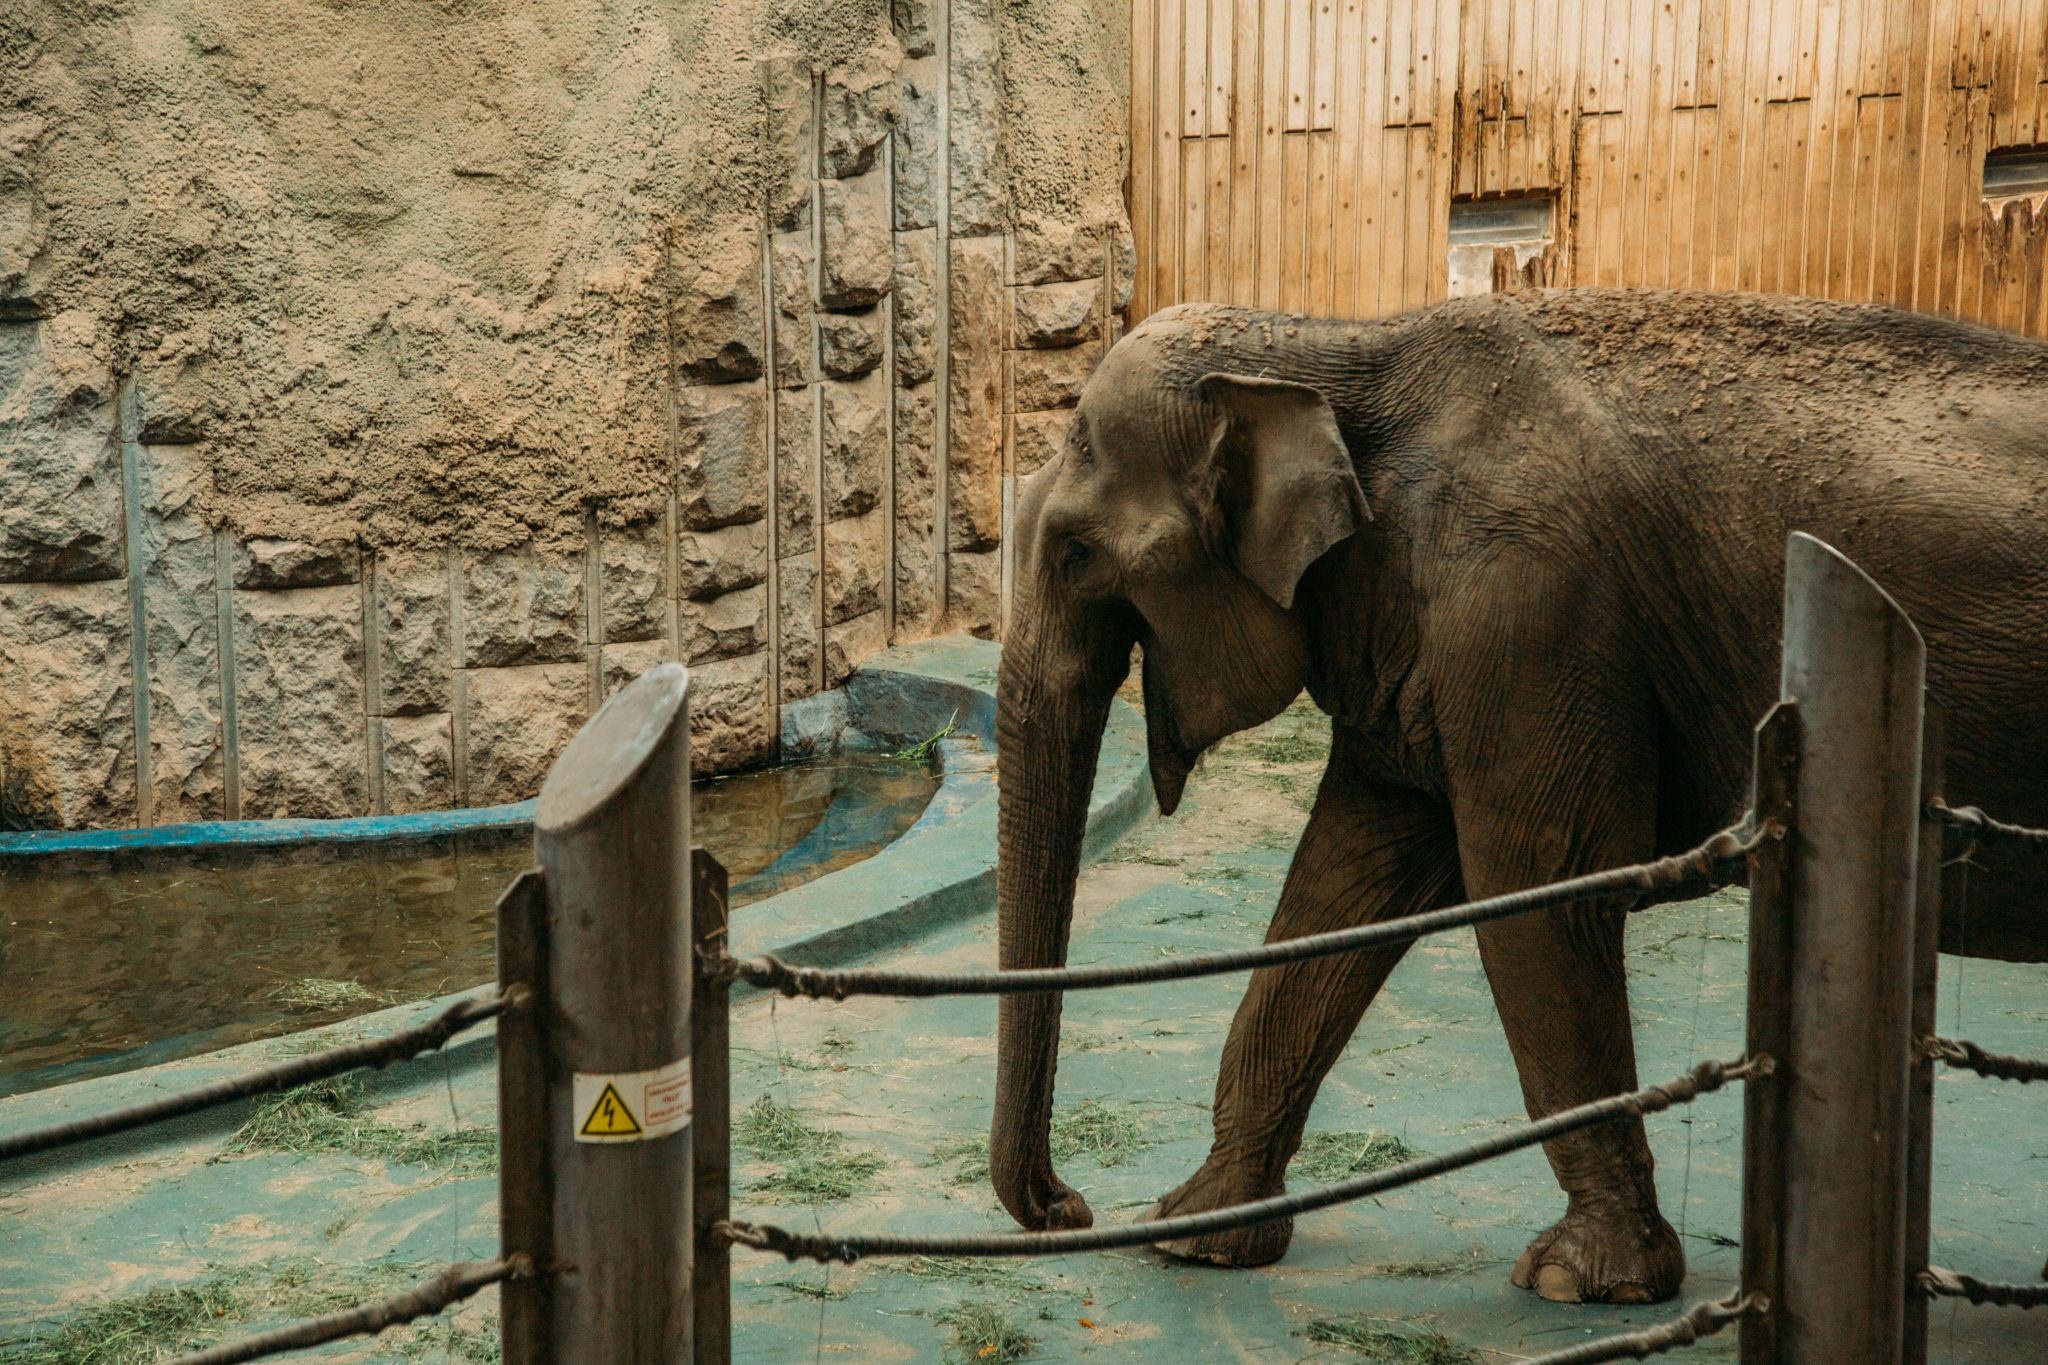 Elephants at the Moscow Zoo during their feeding time